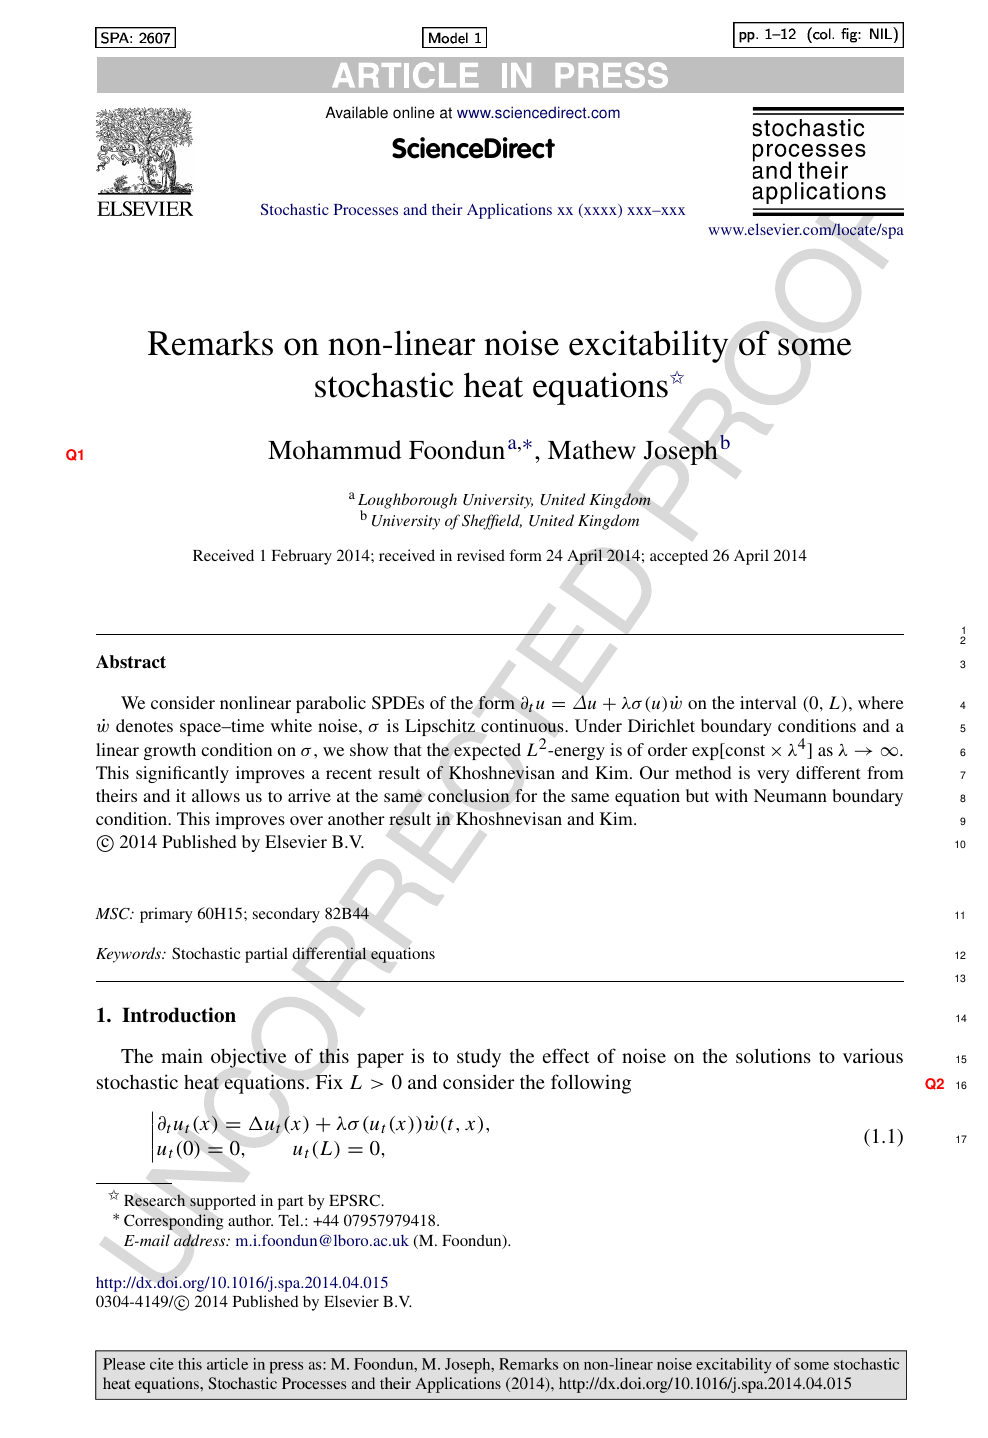 Remarks On Non Linear Noise Excitability Of Some Stochastic Heat Equations Topic Of Research Paper In Mathematics Download Scholarly Article Pdf And Read For Free On Cyberleninka Open Science Hub